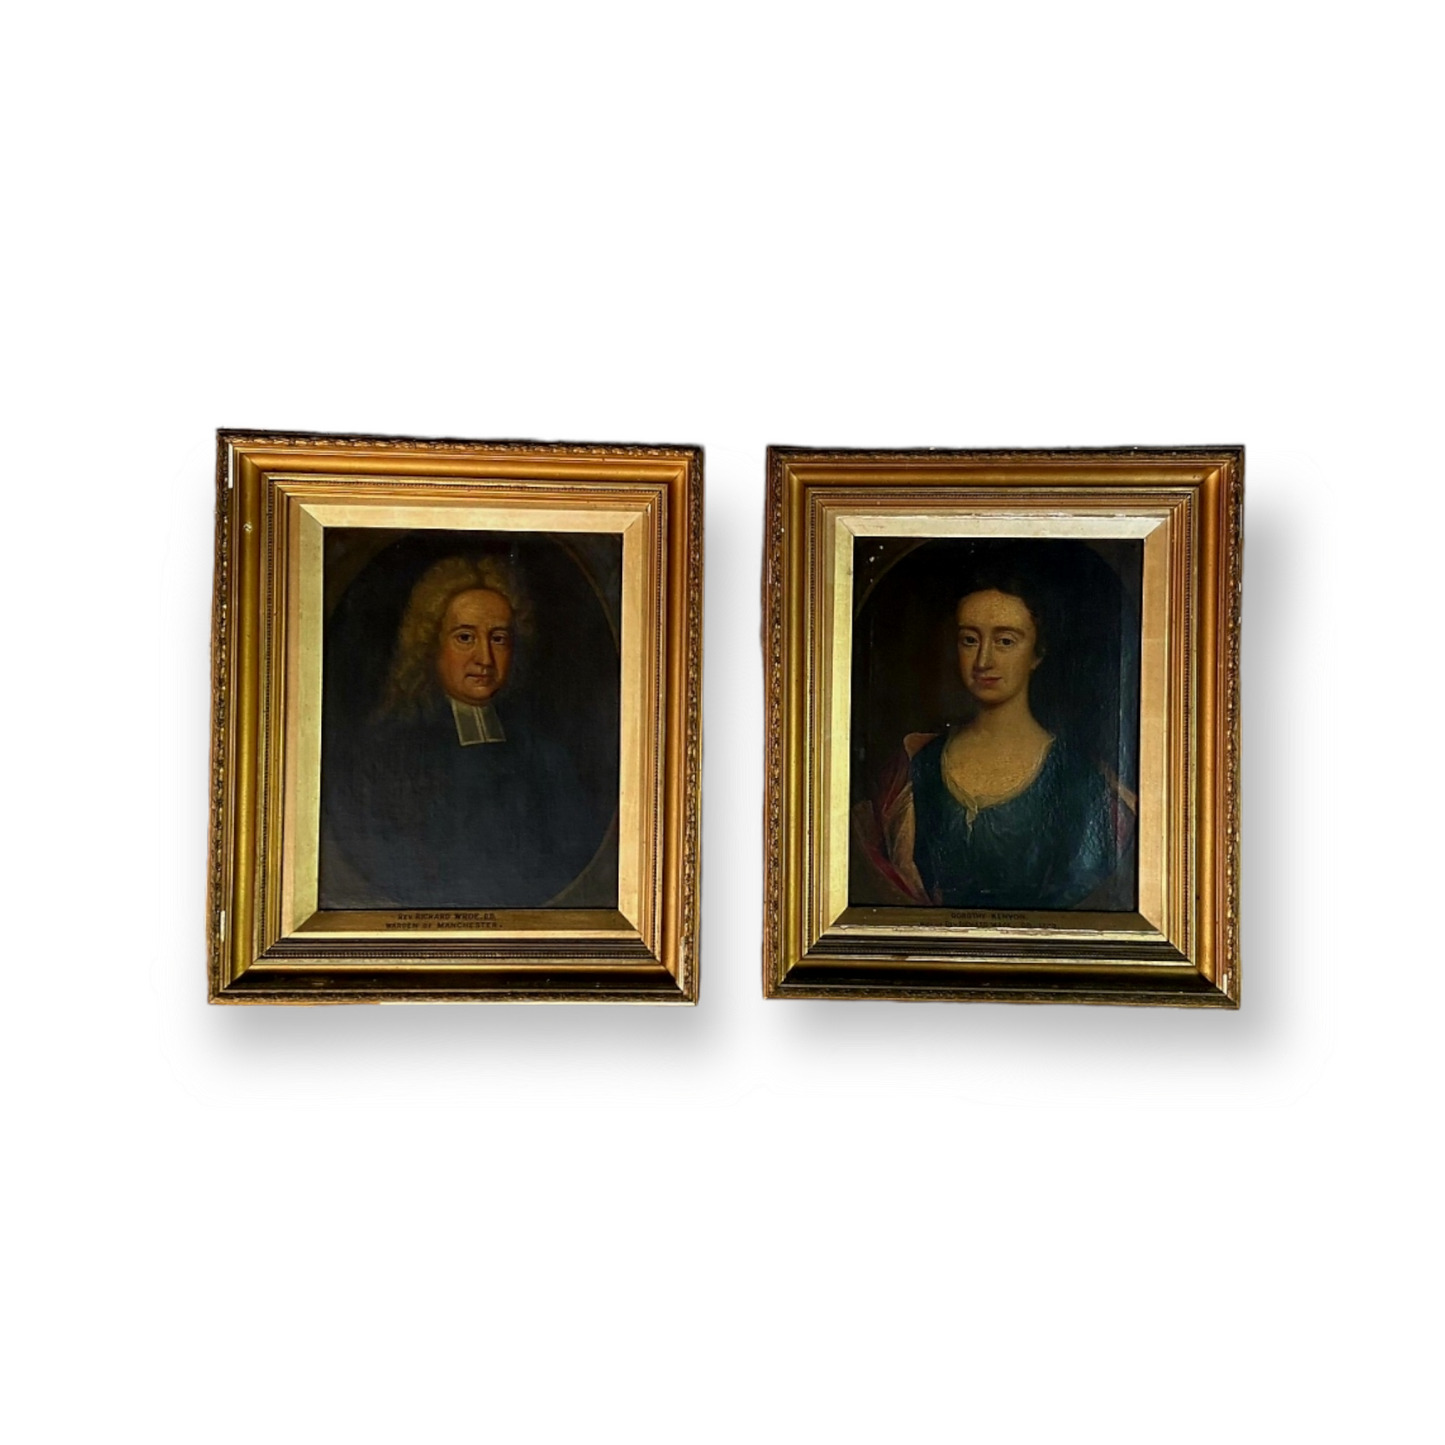 A Charming Pair of Late 17th Century English School Portraits of Reverend Richard Wroe and Mrs Dorothy Wroe